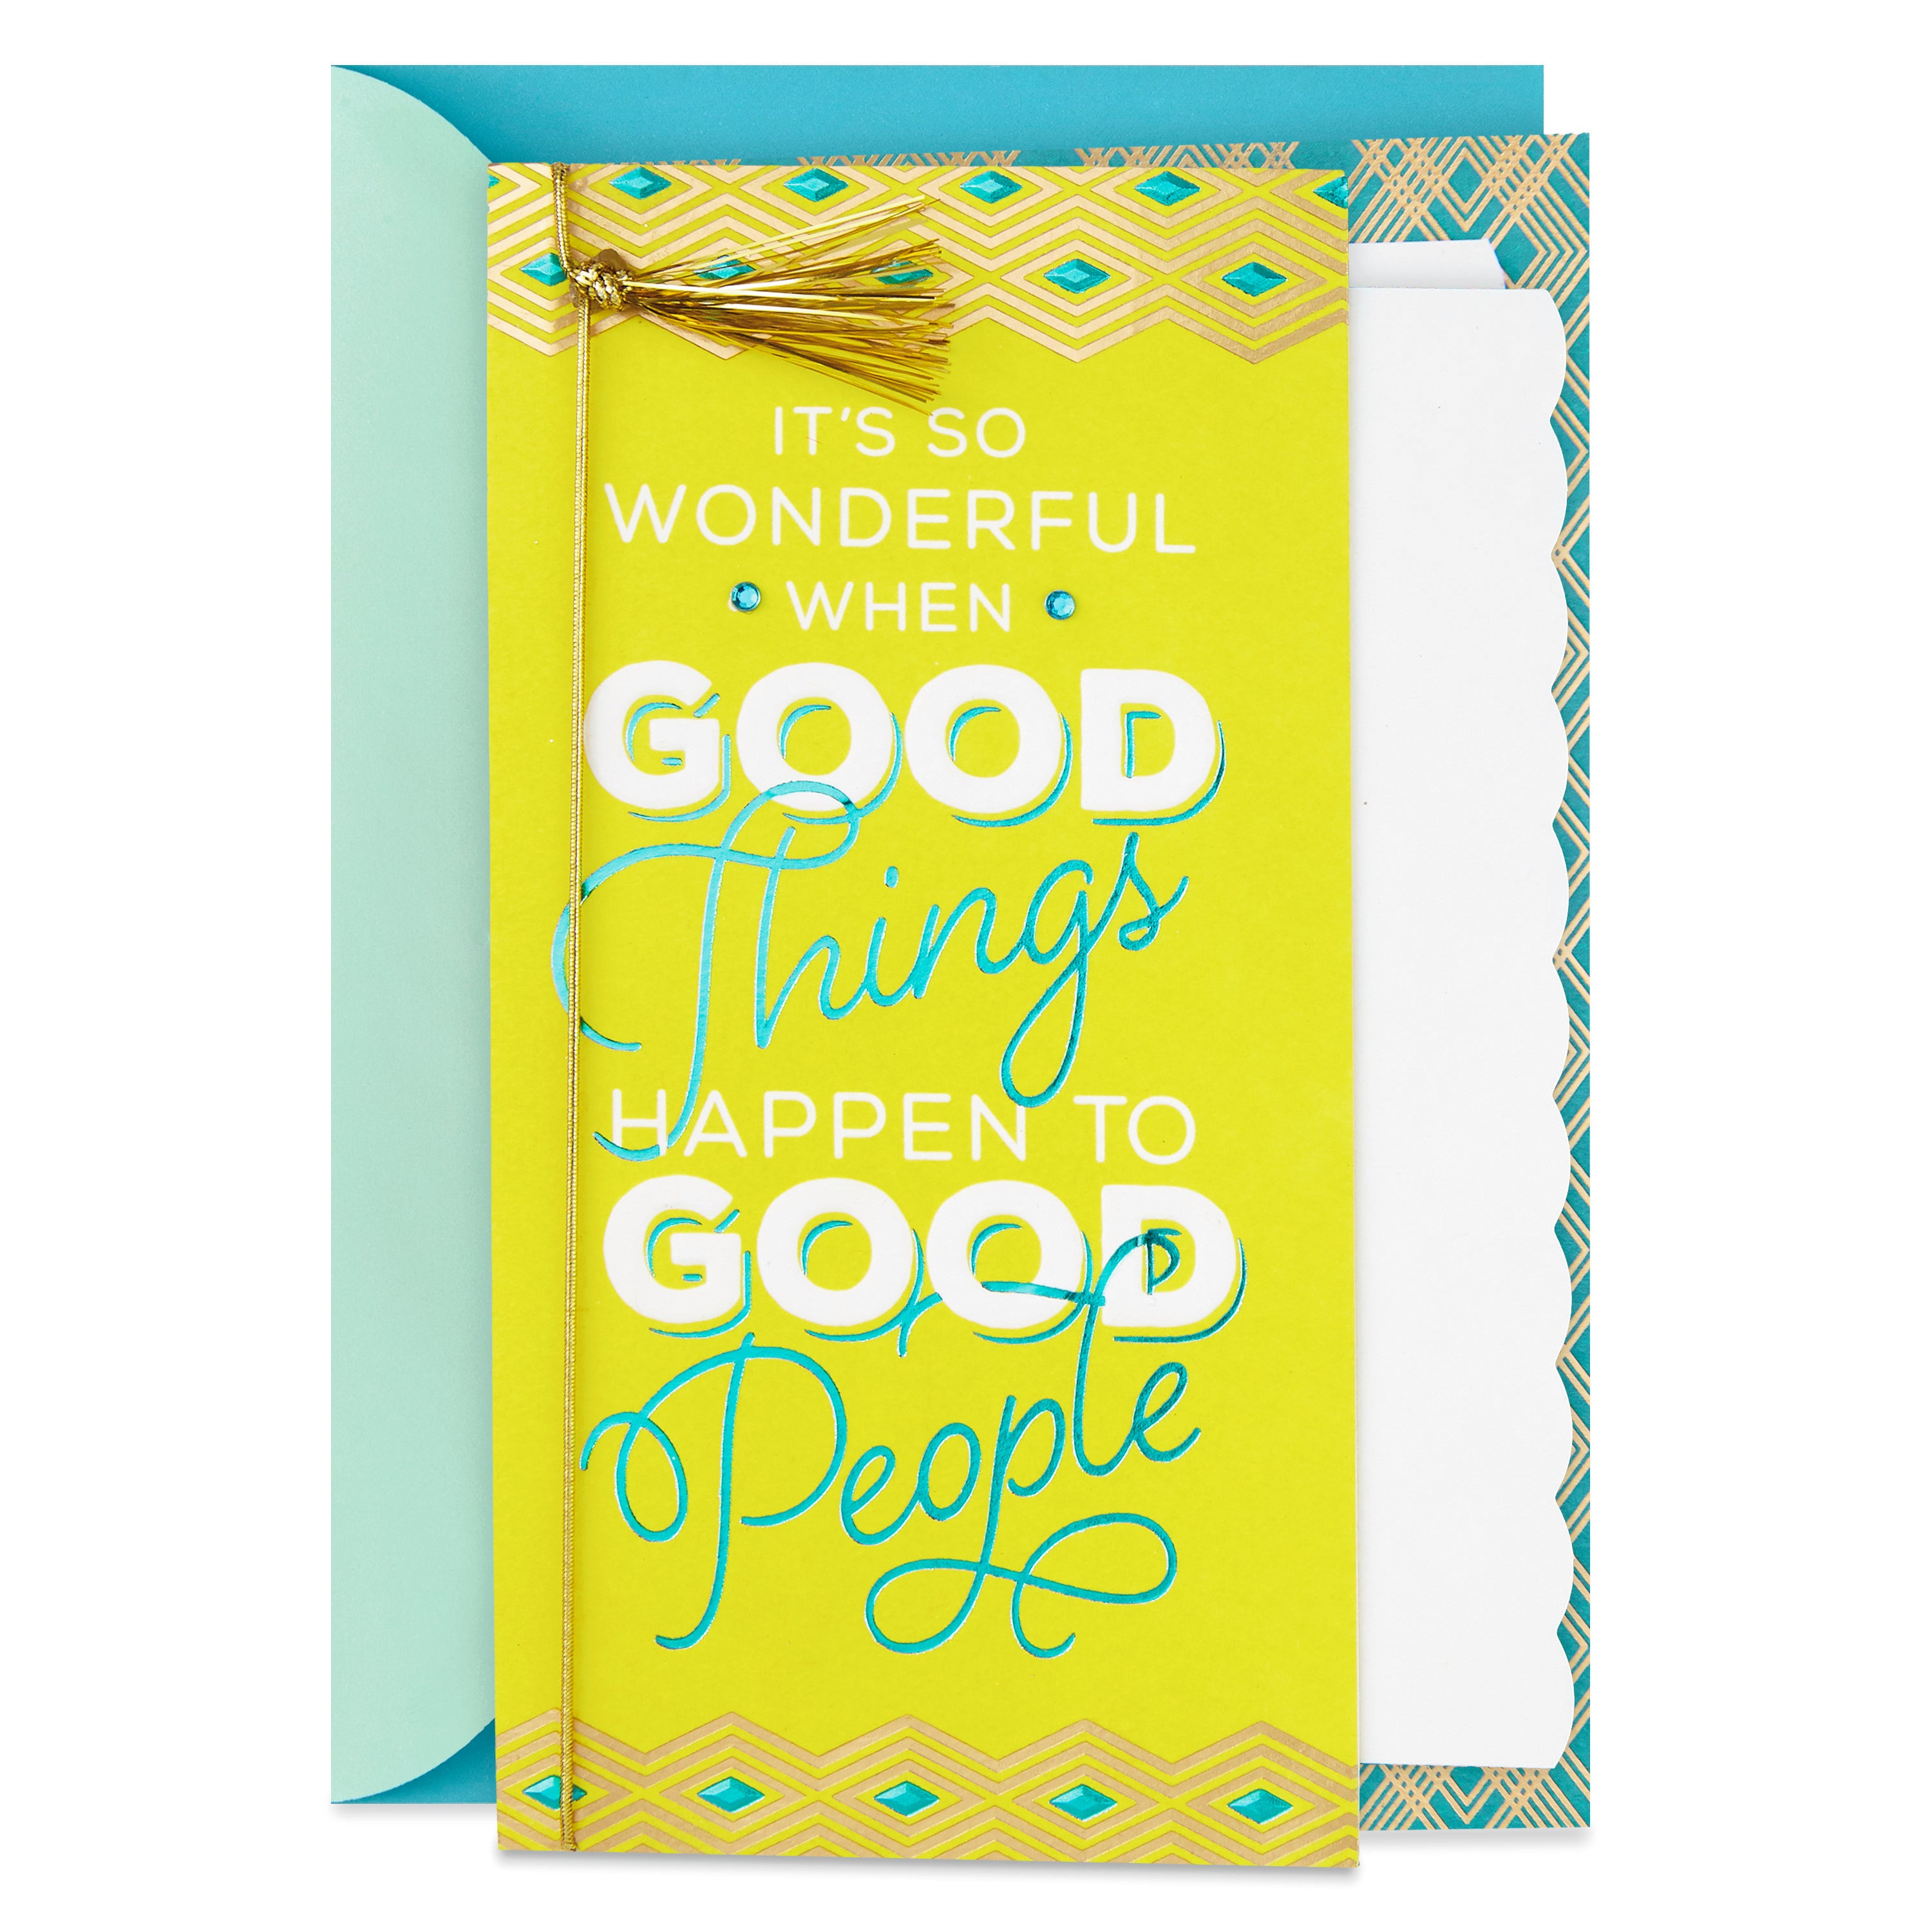 Hallmark Congratulations Card for Graduation or Retirement (When Good Things Happen to Good People)